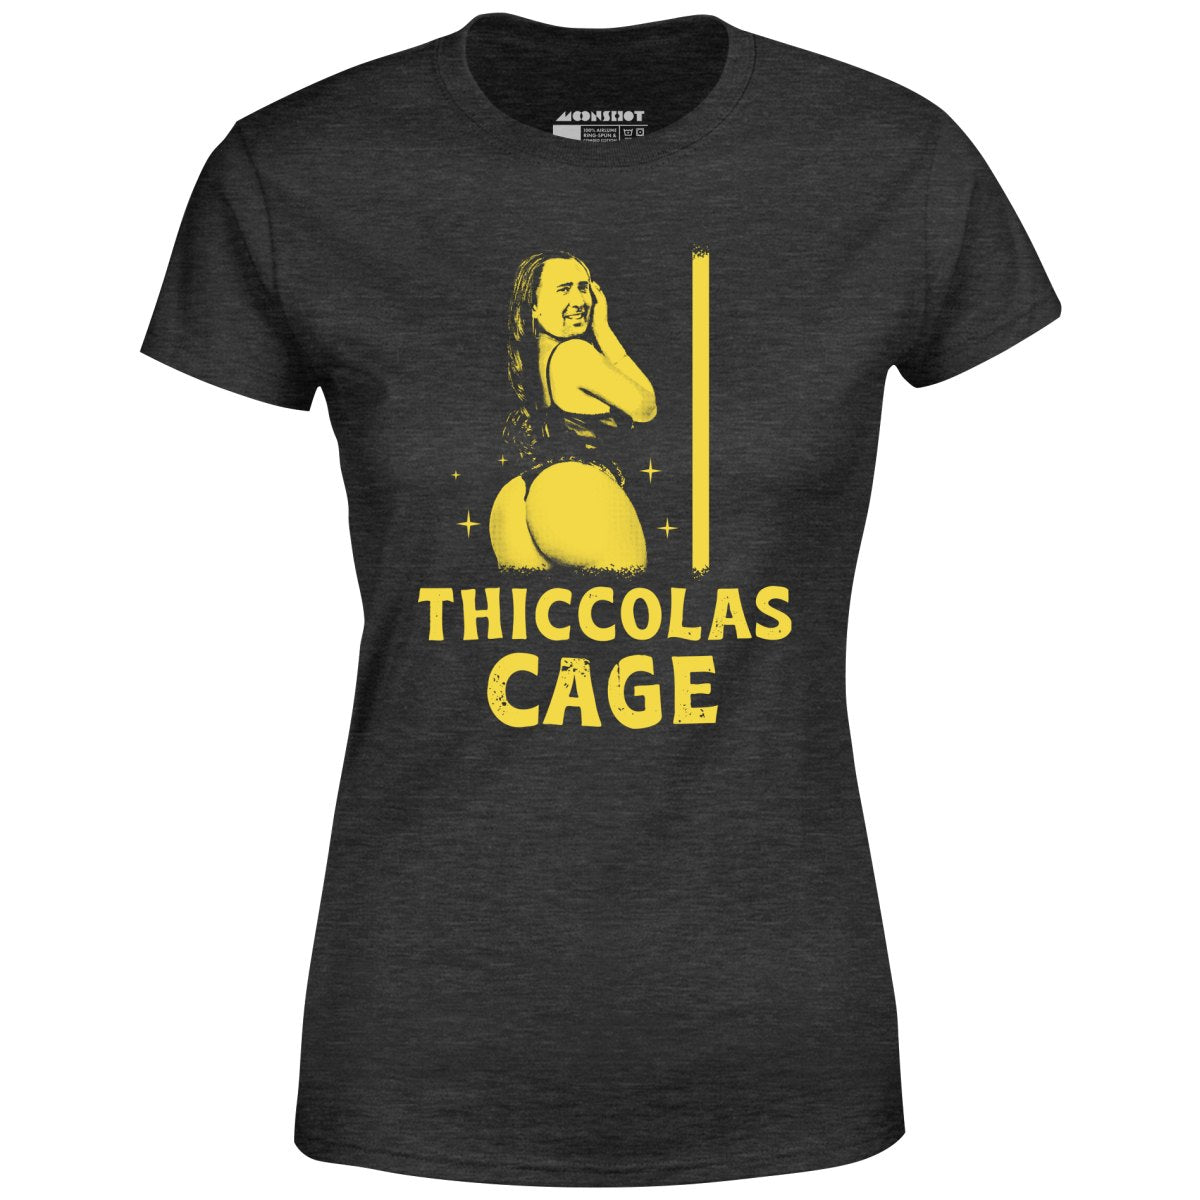 Thiccolas Cage - Women's T-Shirt